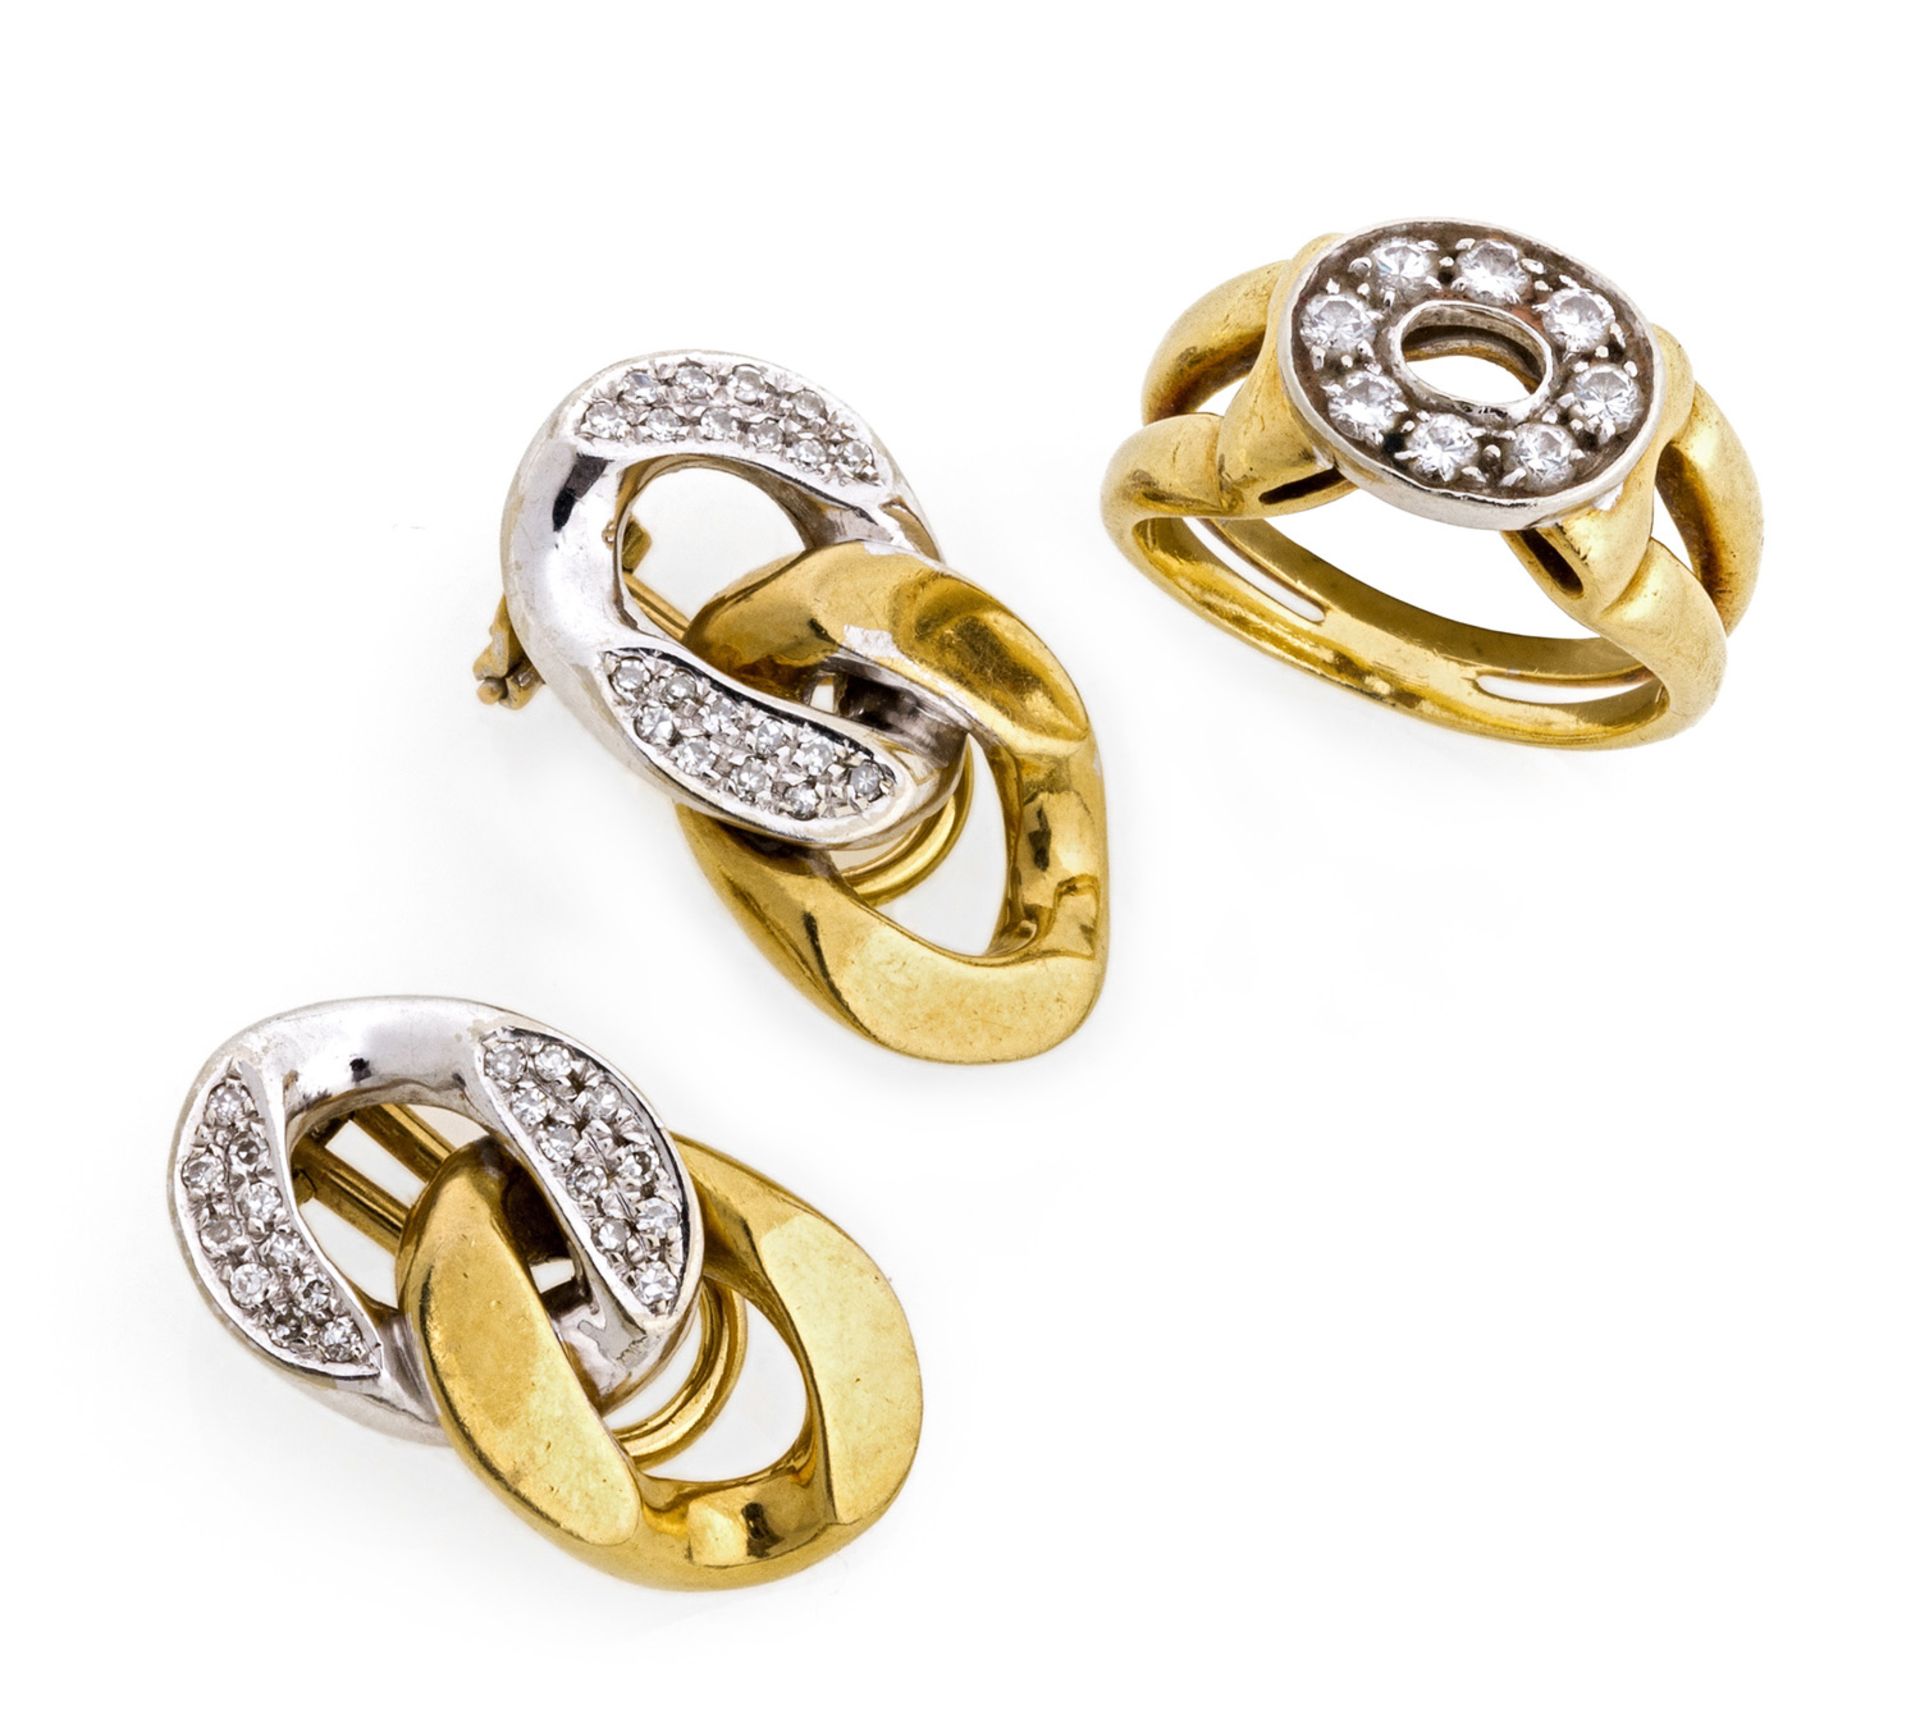 SET OF GOLD EARRINGS AND RING